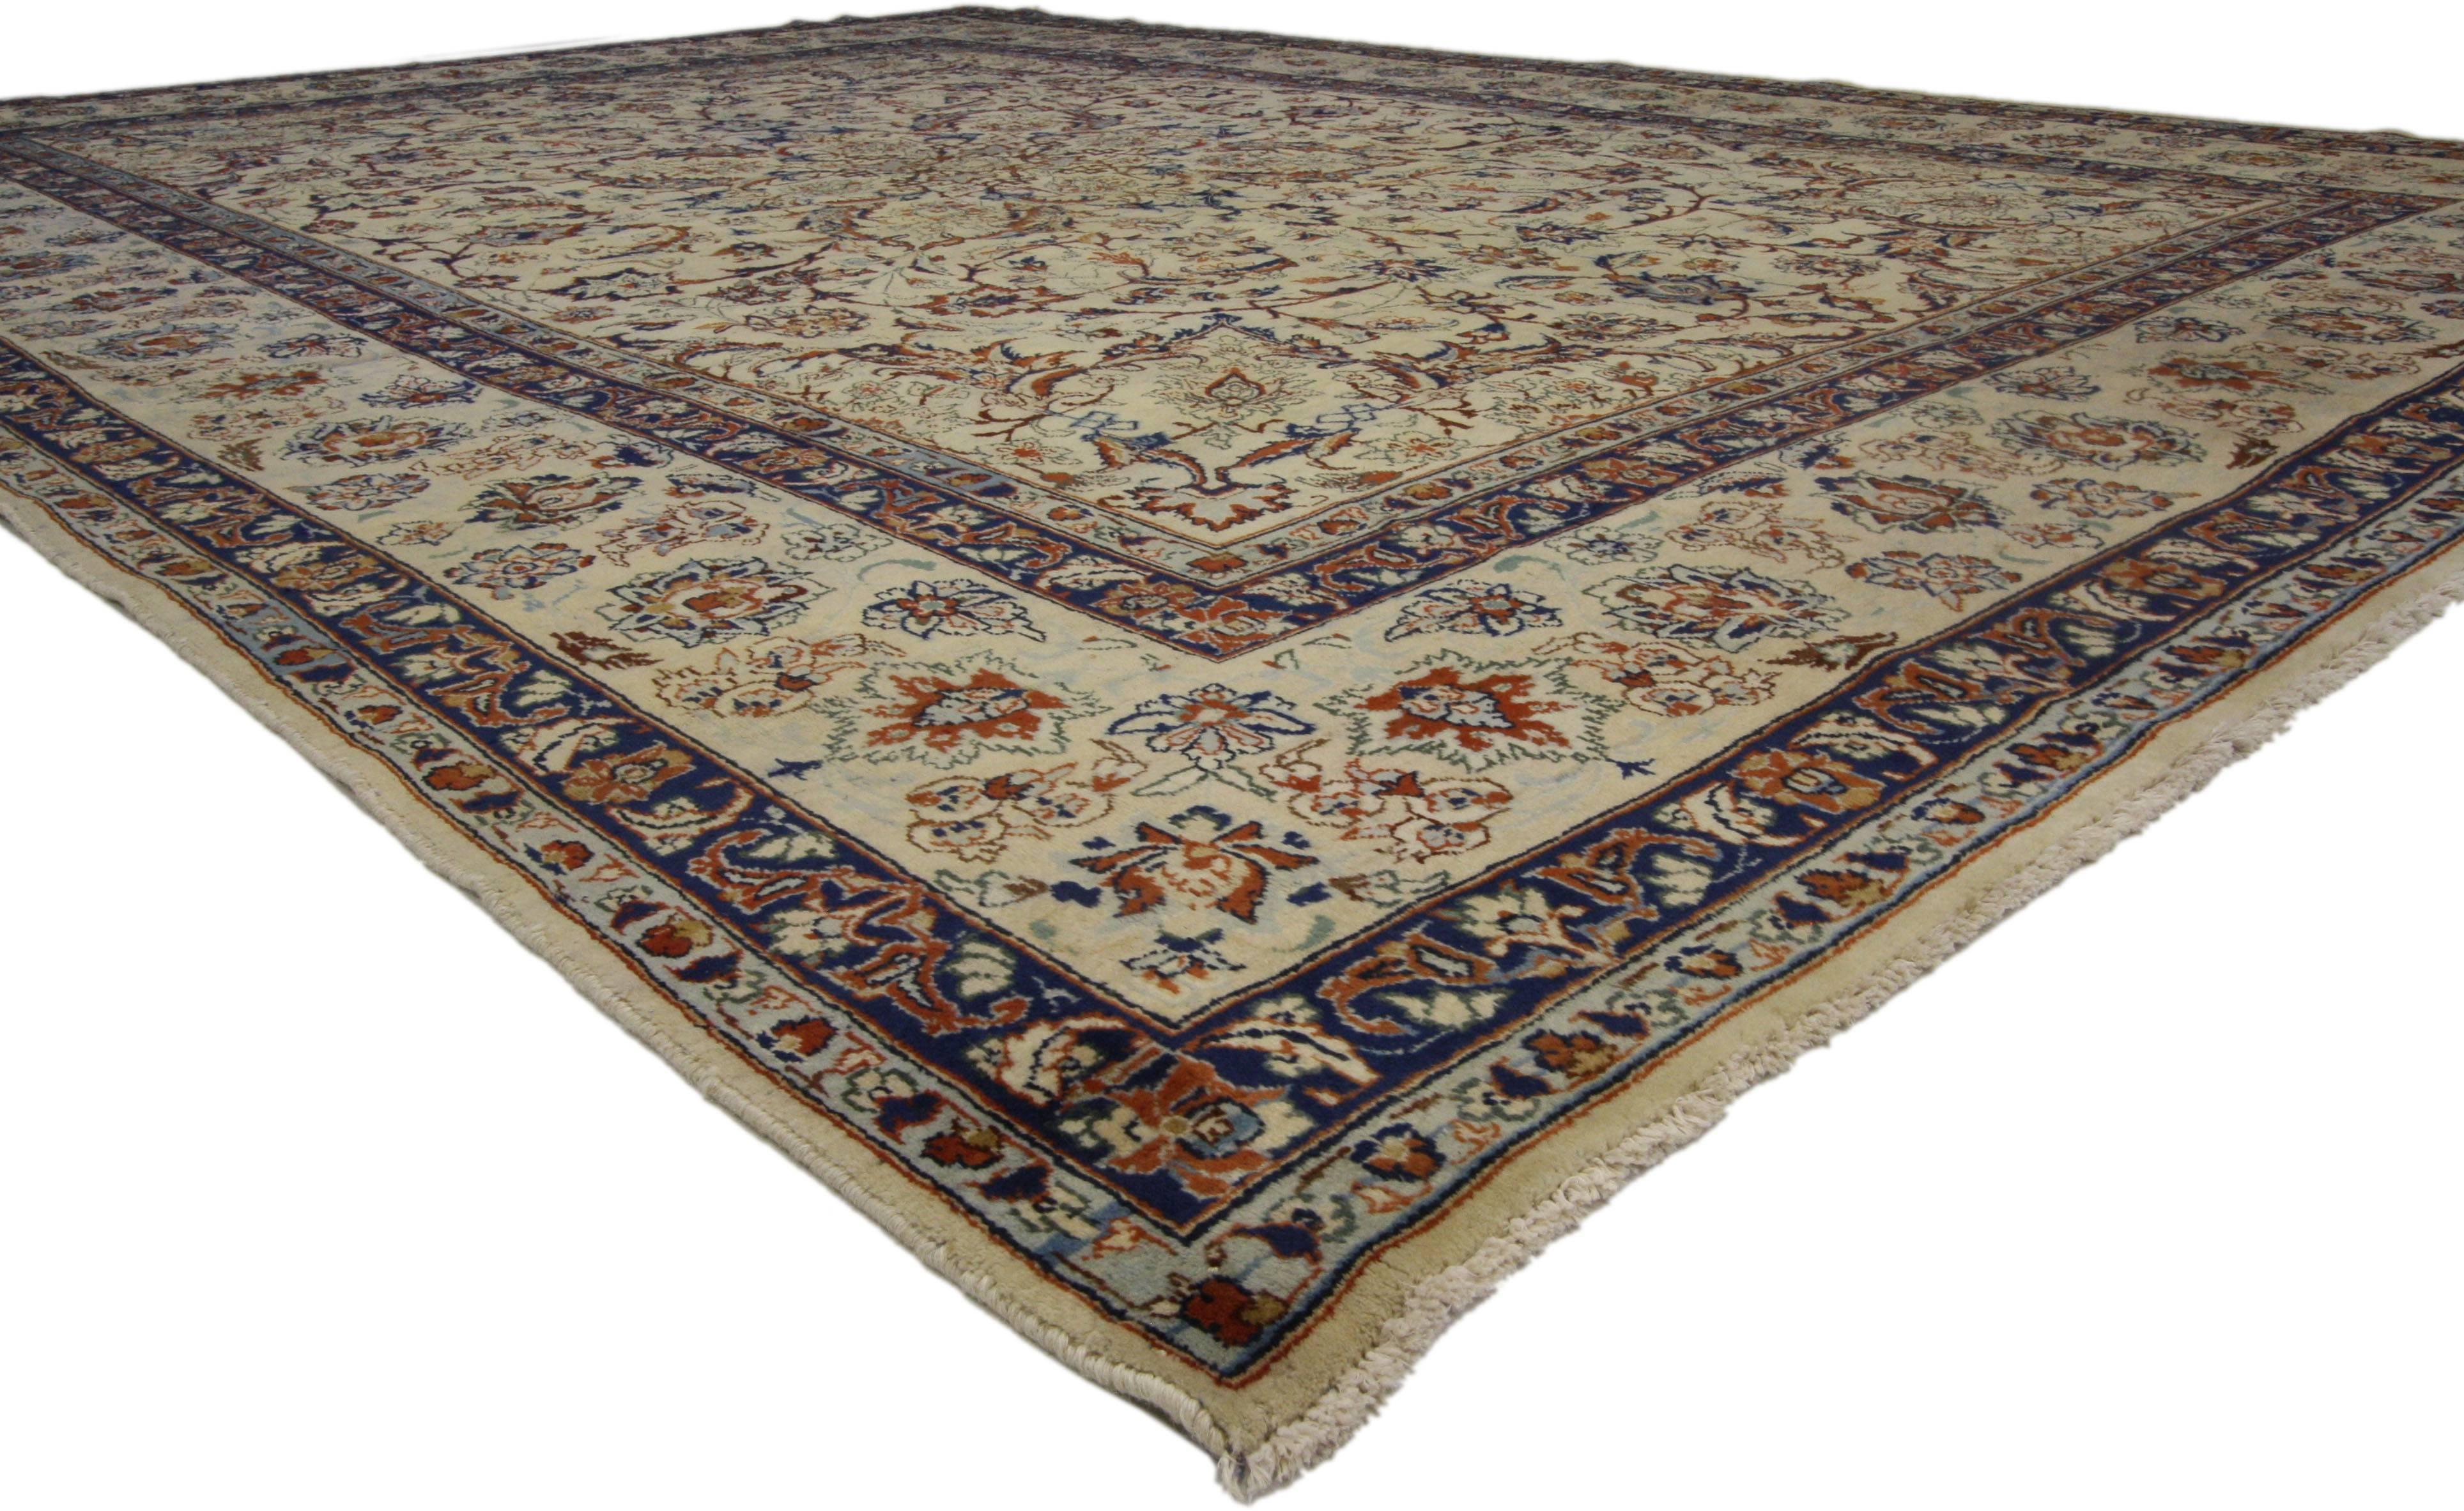 76490, vintage Persian Yazd area rug with traditional style. An excellent representation of Persian culture, this captivating antique rug features an inconspicuous central medallion composed of elaborate flowers and arabesque vines dancing with